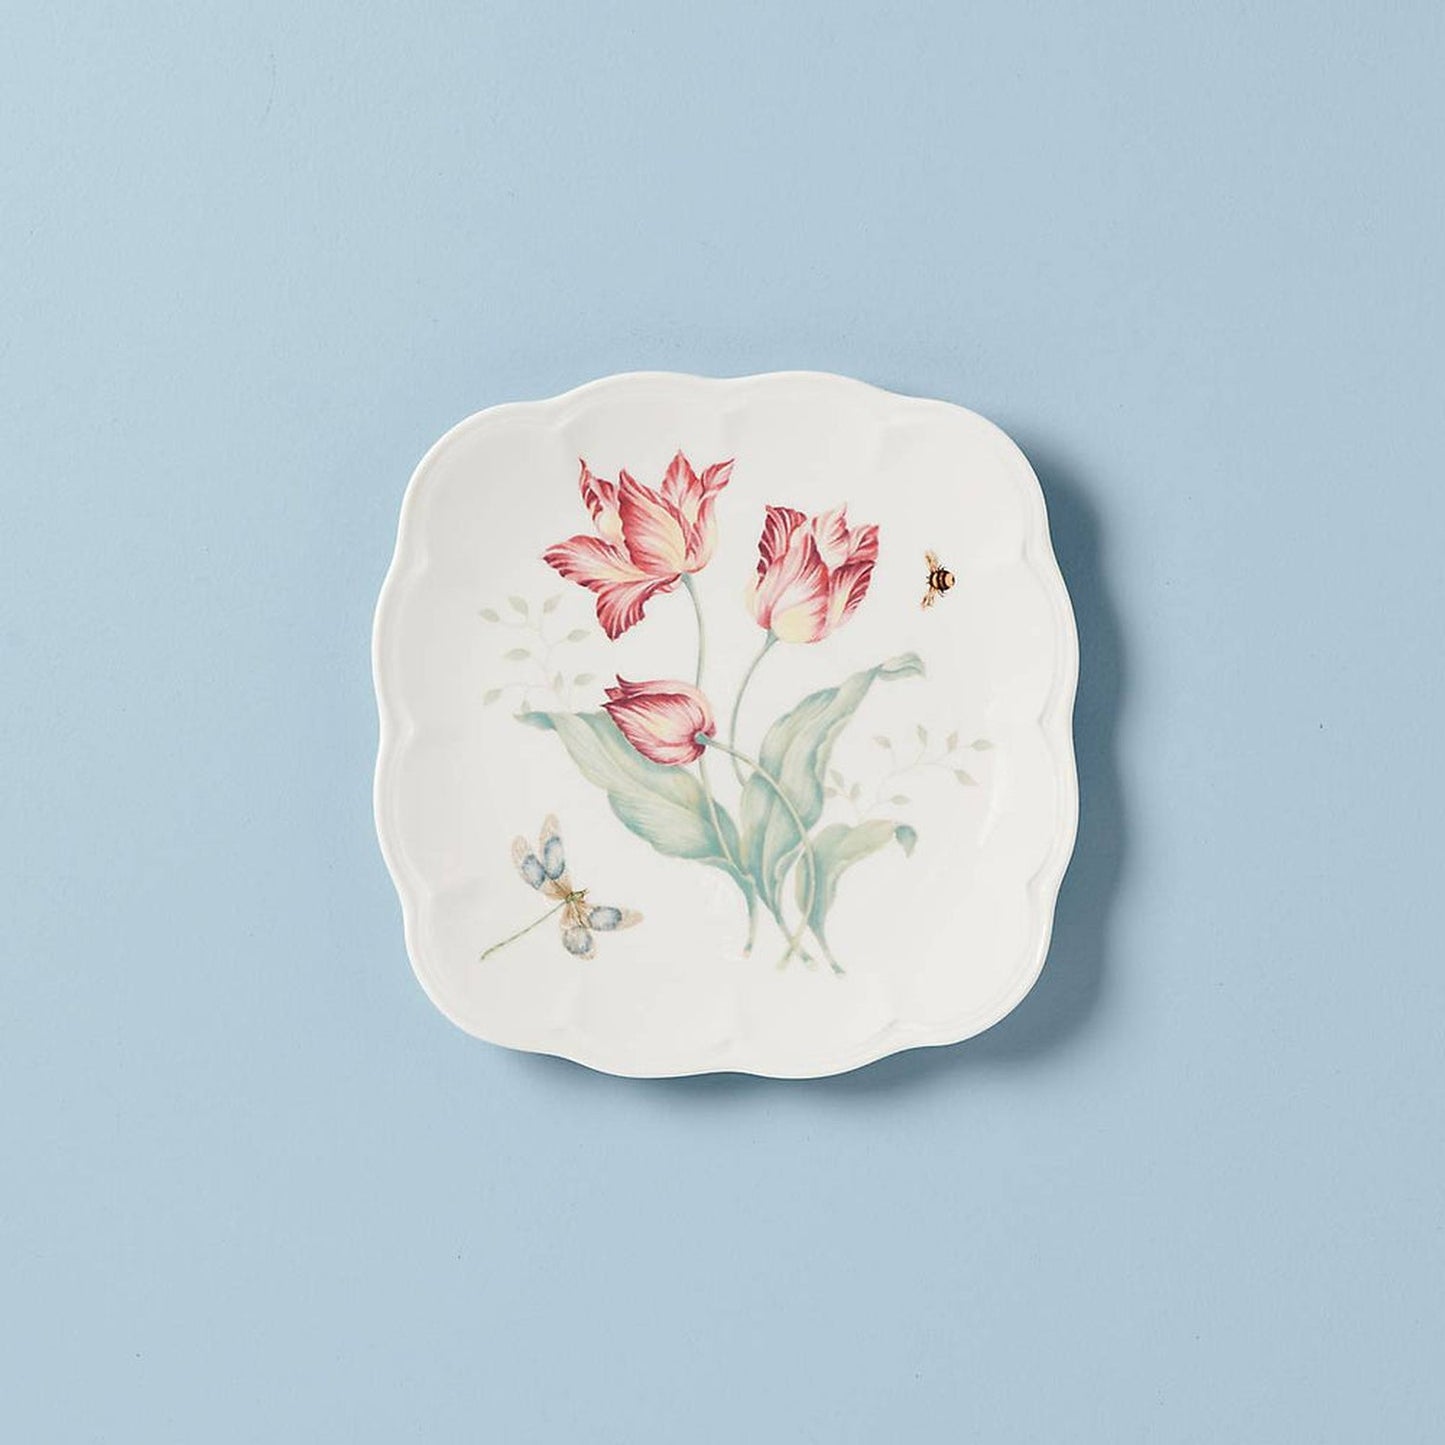 Lenox Butterfly Meadow Square Accent Plate